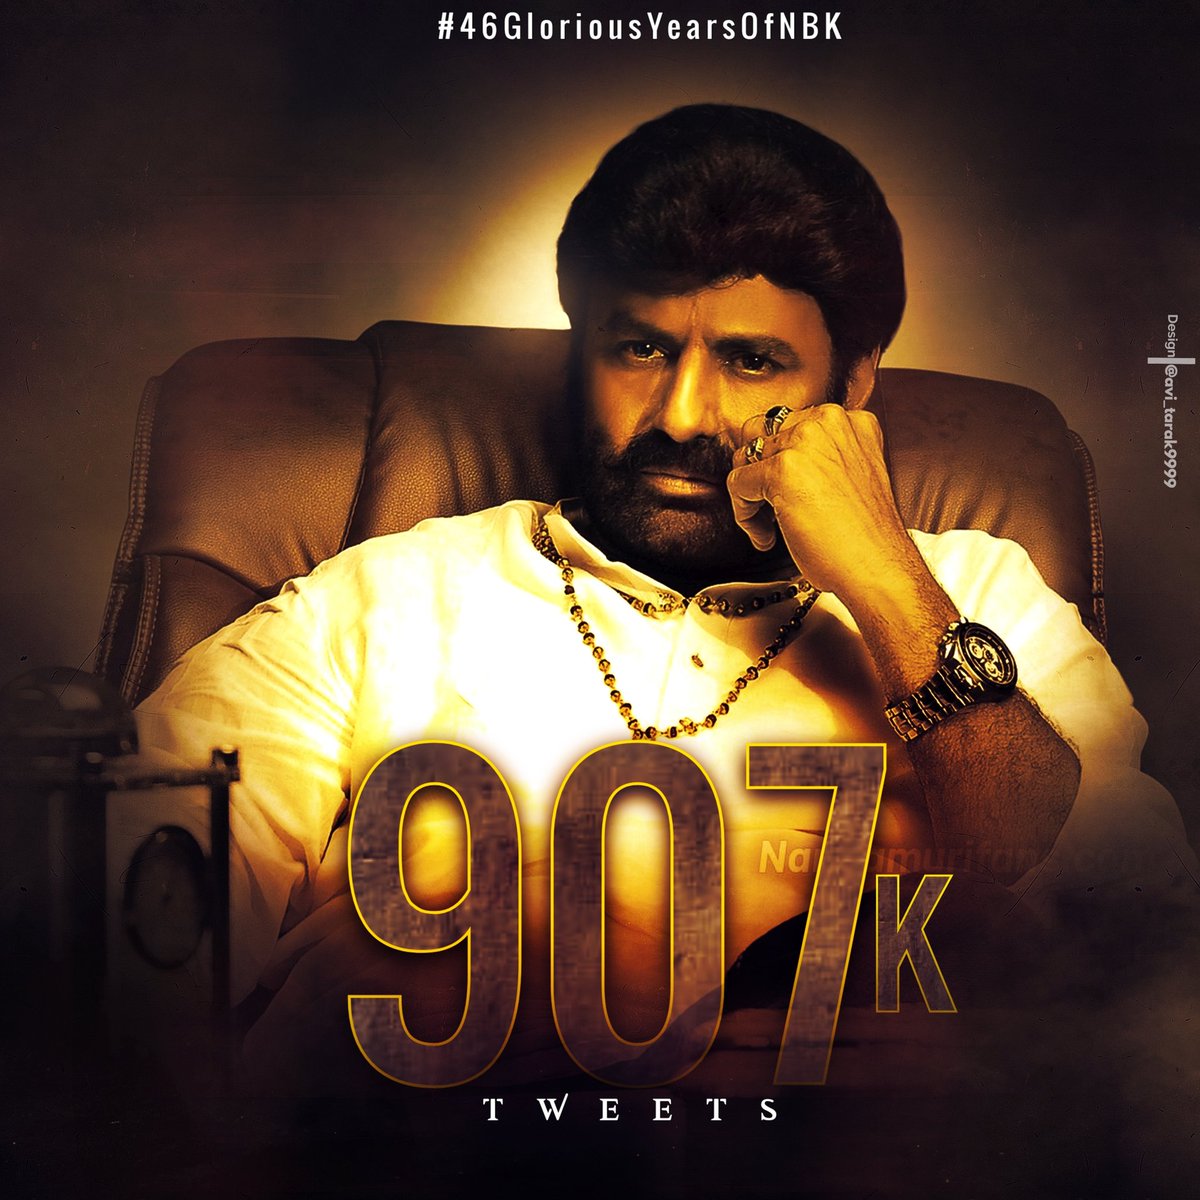 Checkmate 😎🔥

Finally 907K+ Roaring Tweets💥

Only Hero from his Generation to have Two 900K+ Trends (B'day+Anniversary)

#46GloriousYearsOfNBK #NBK